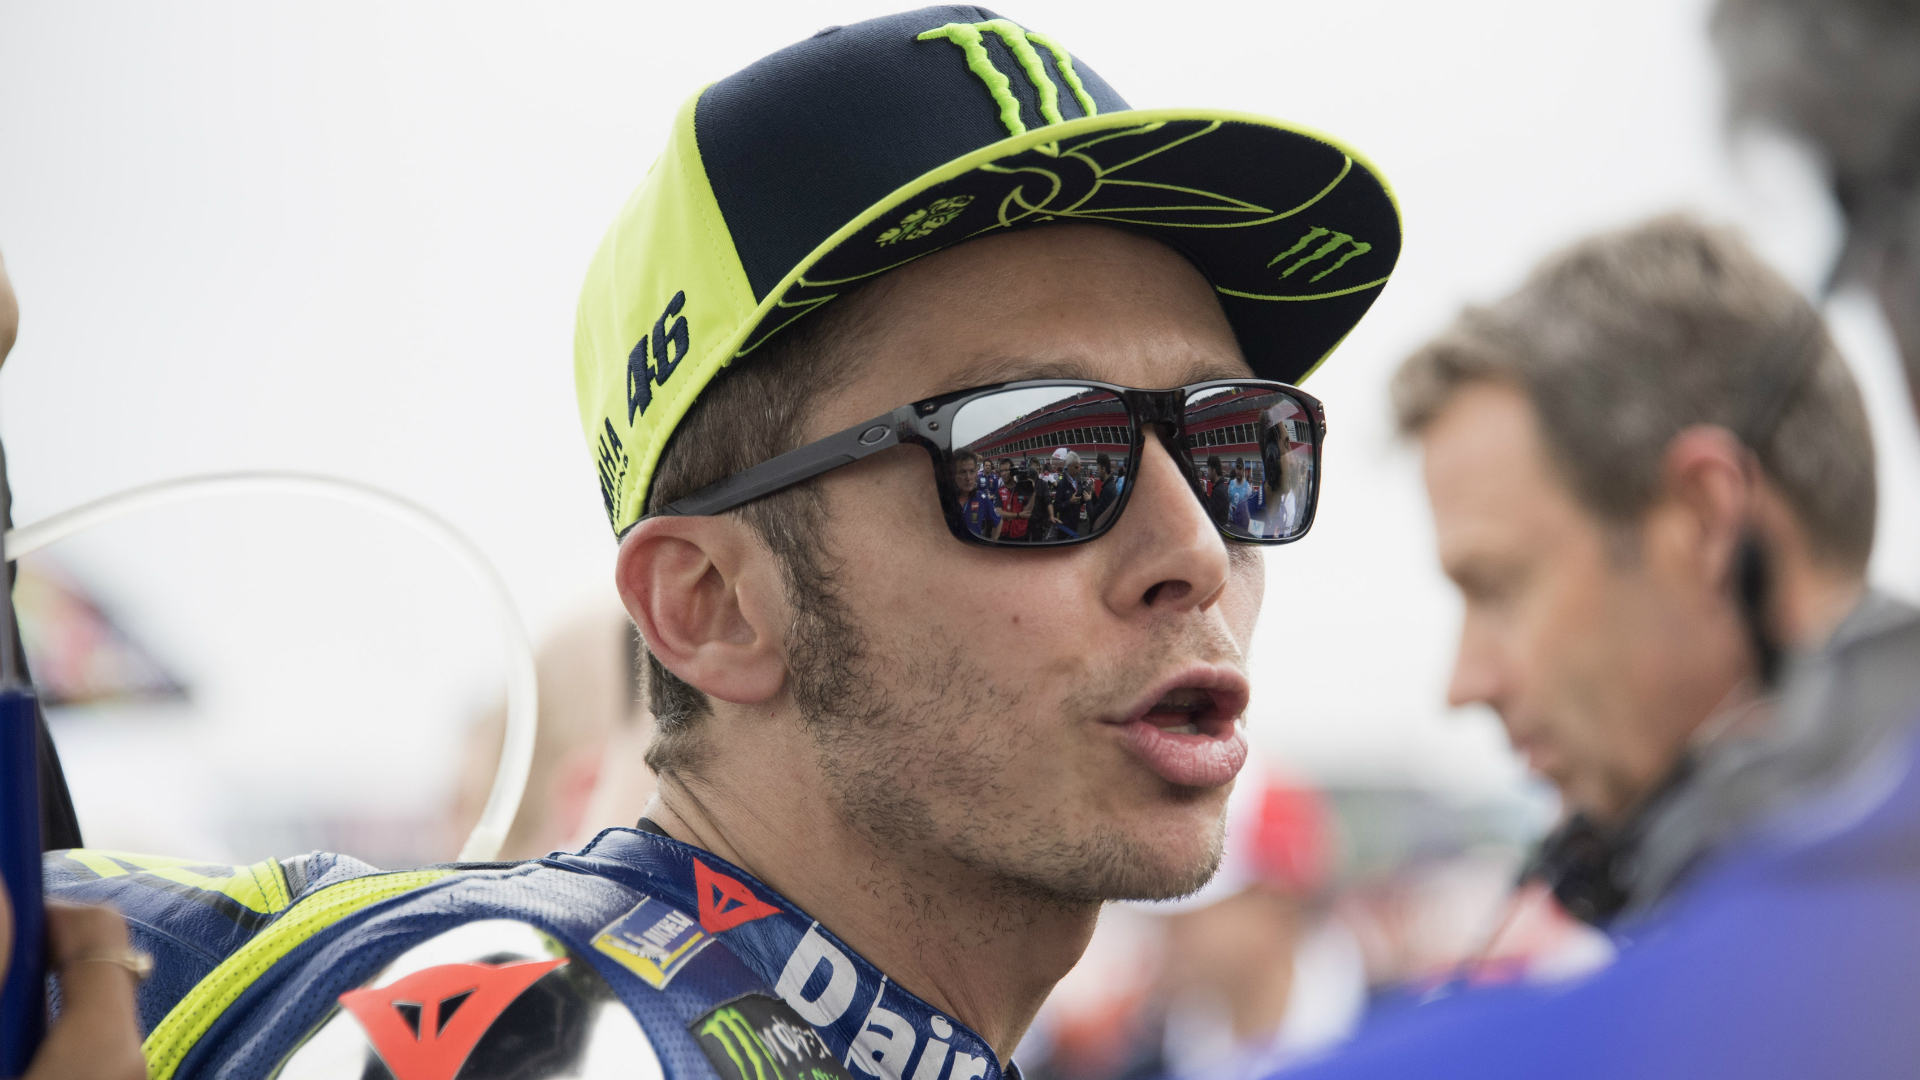 Valentino Rossi said he is scared on track when competing against Marc Marquez following Sunday's action-packed race on Sunday.